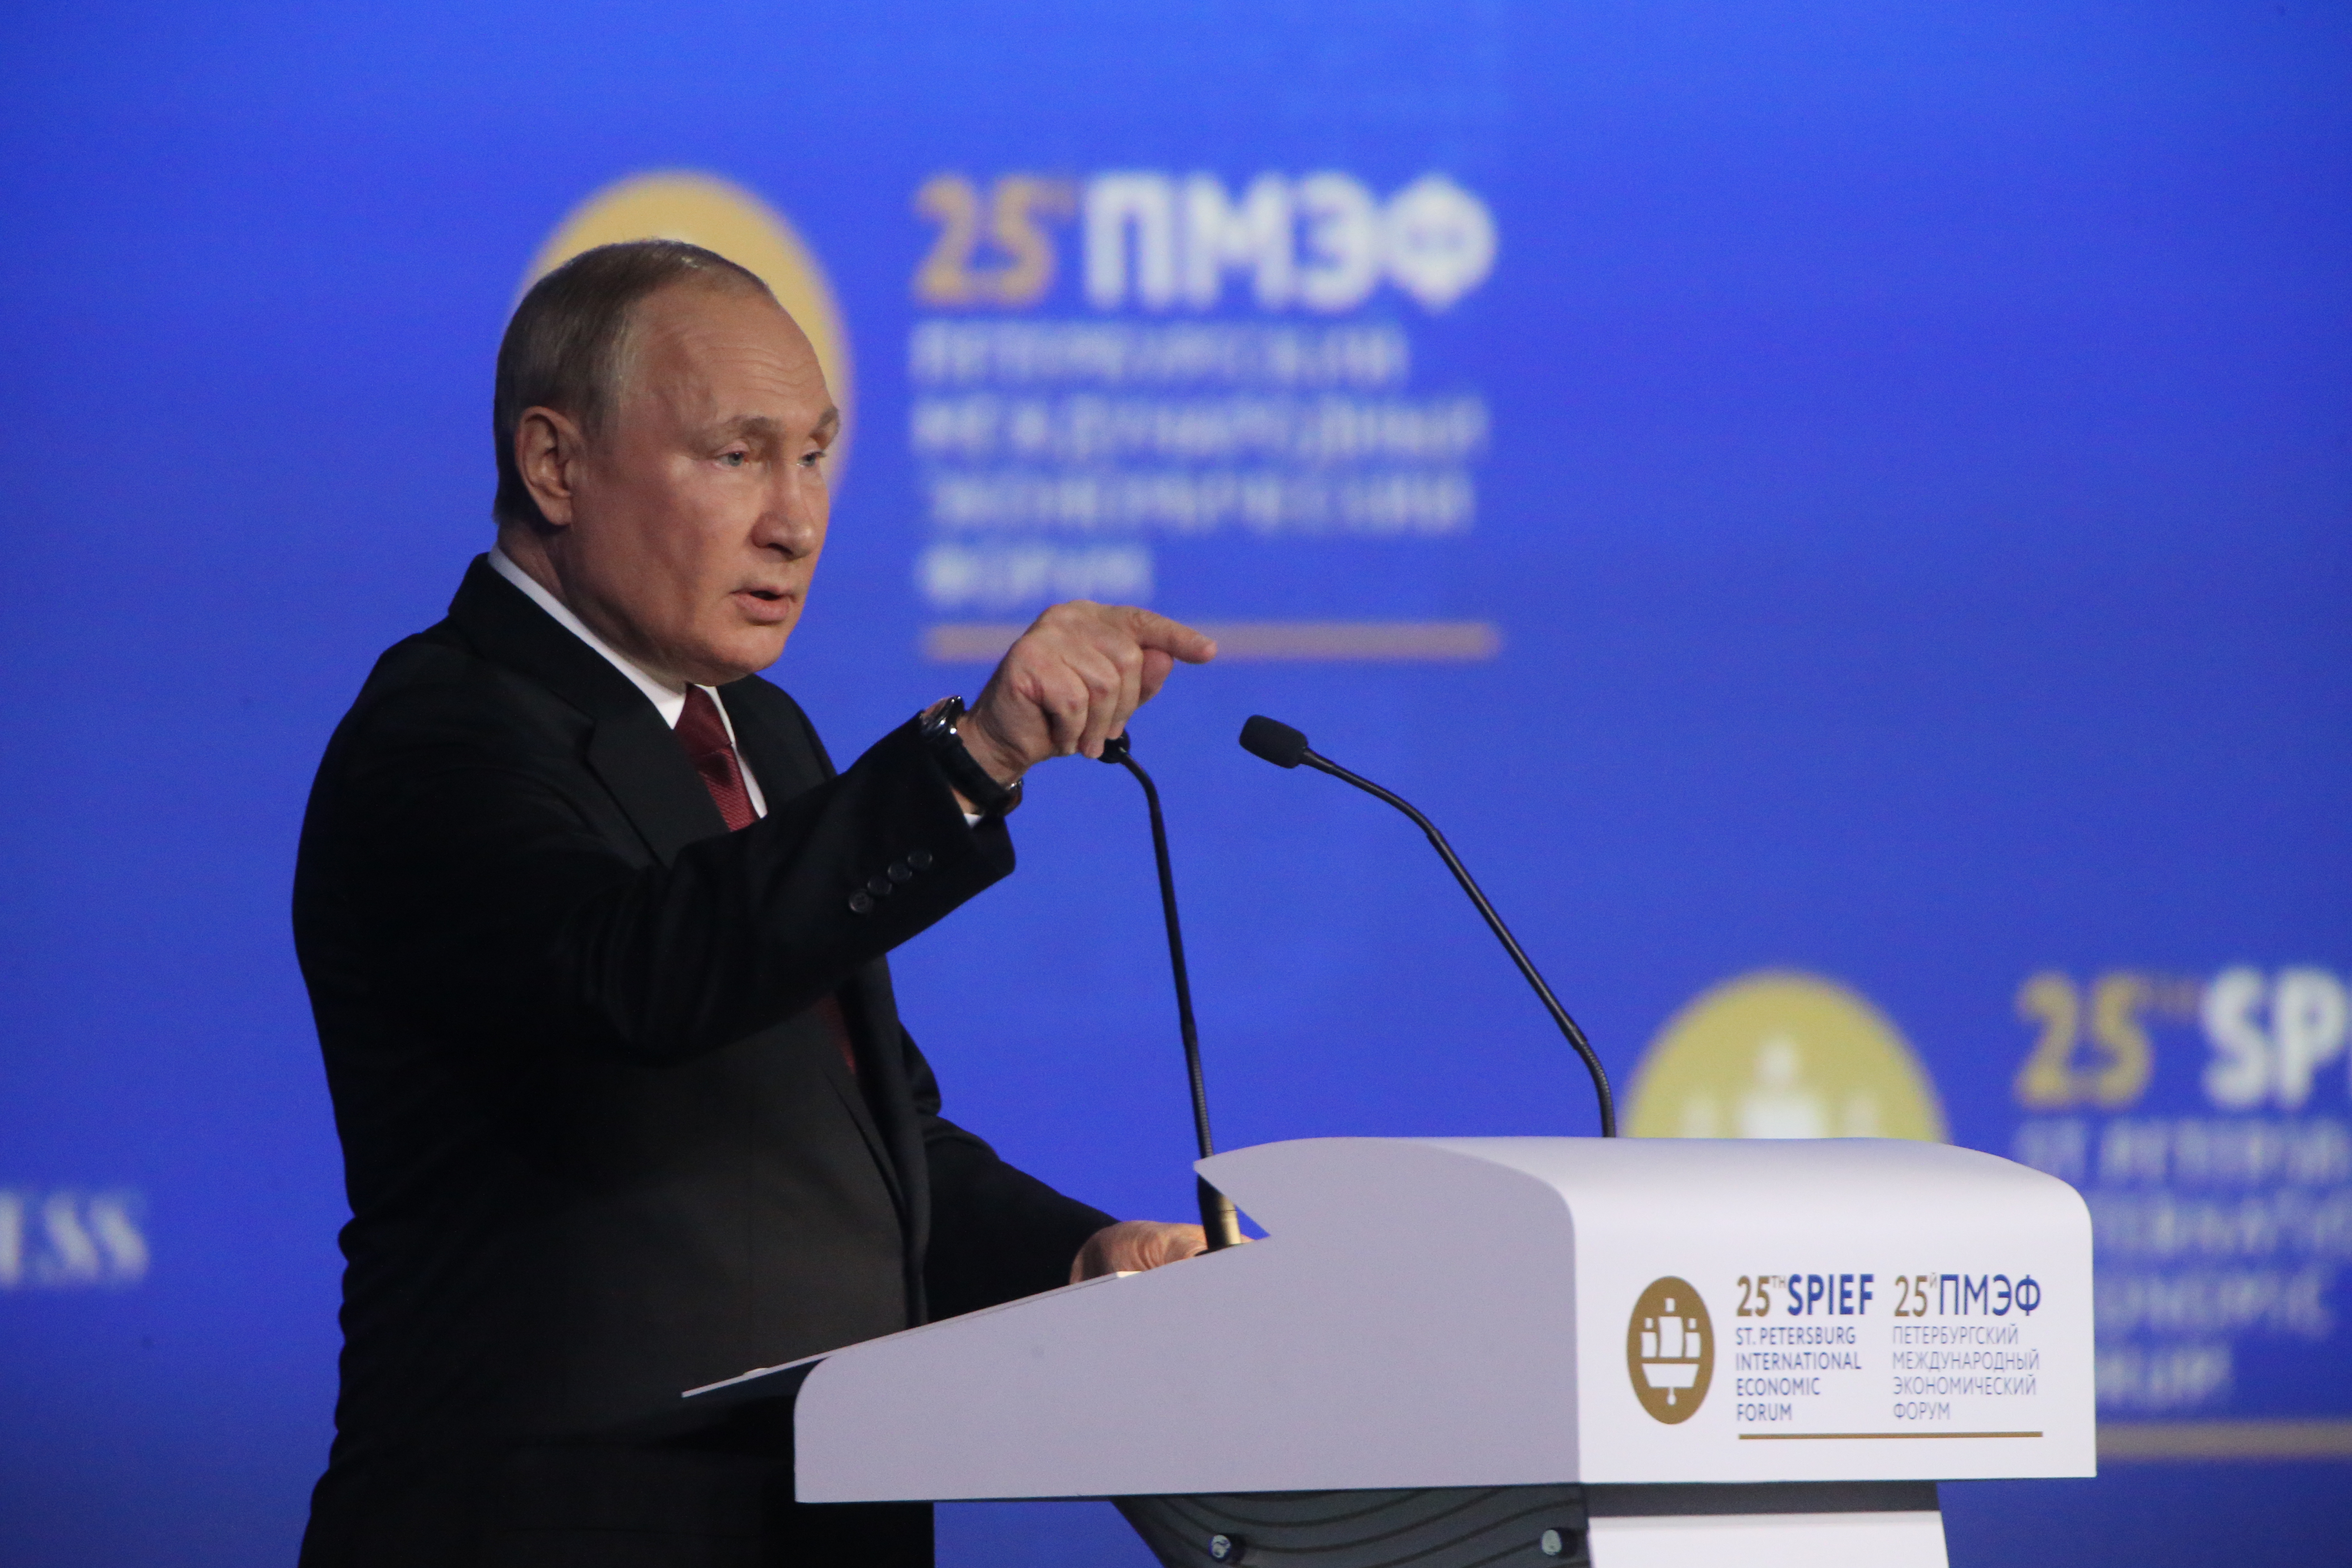 Putin lashes out at West over sanctions, calls US 'fading world power’